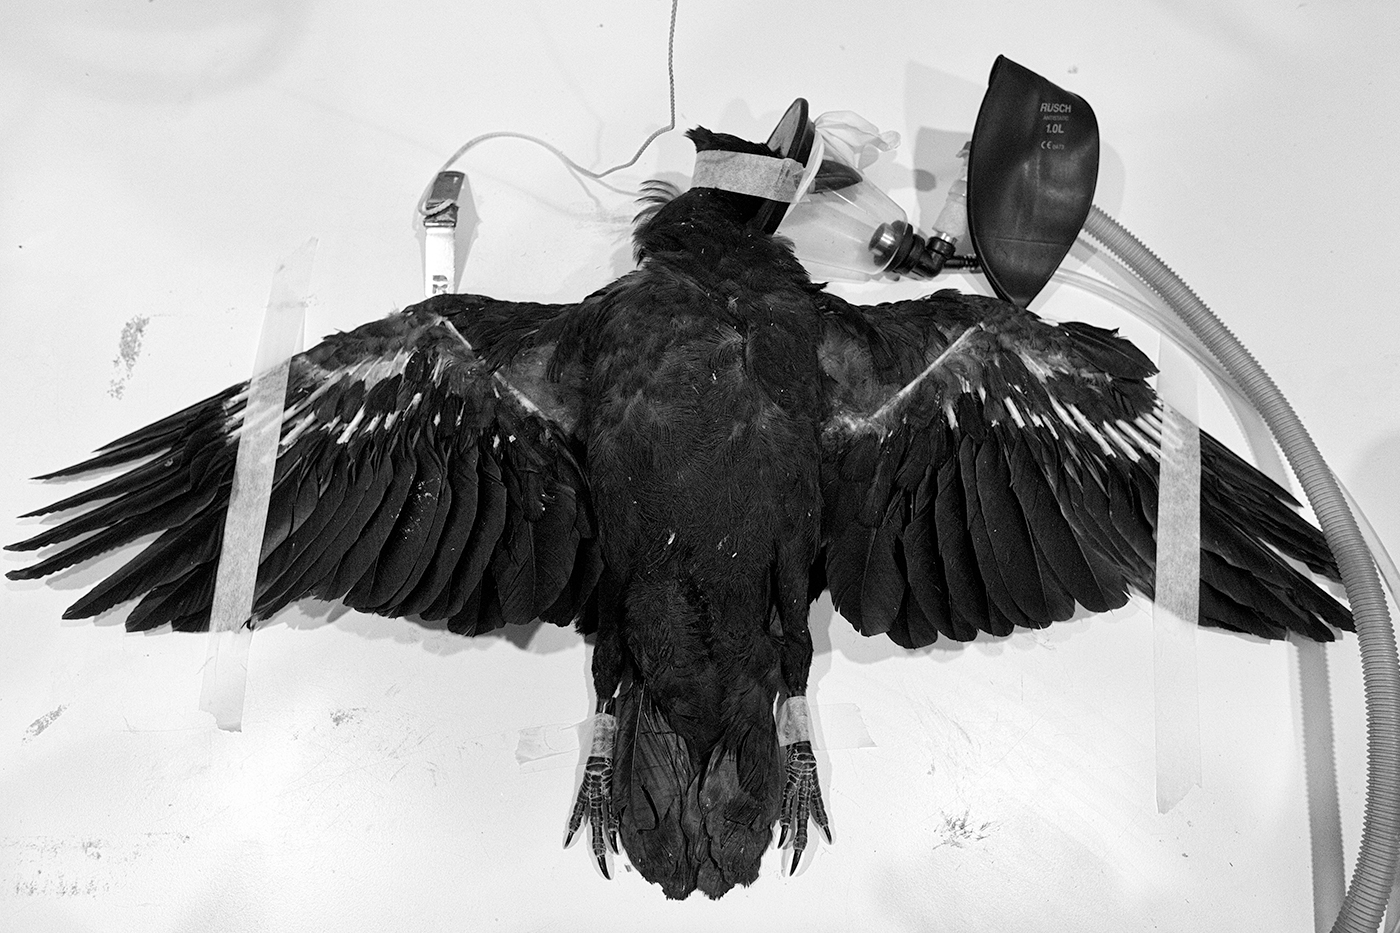 A crow taped to the x-ray platform at the Toronto Wildlife Centre